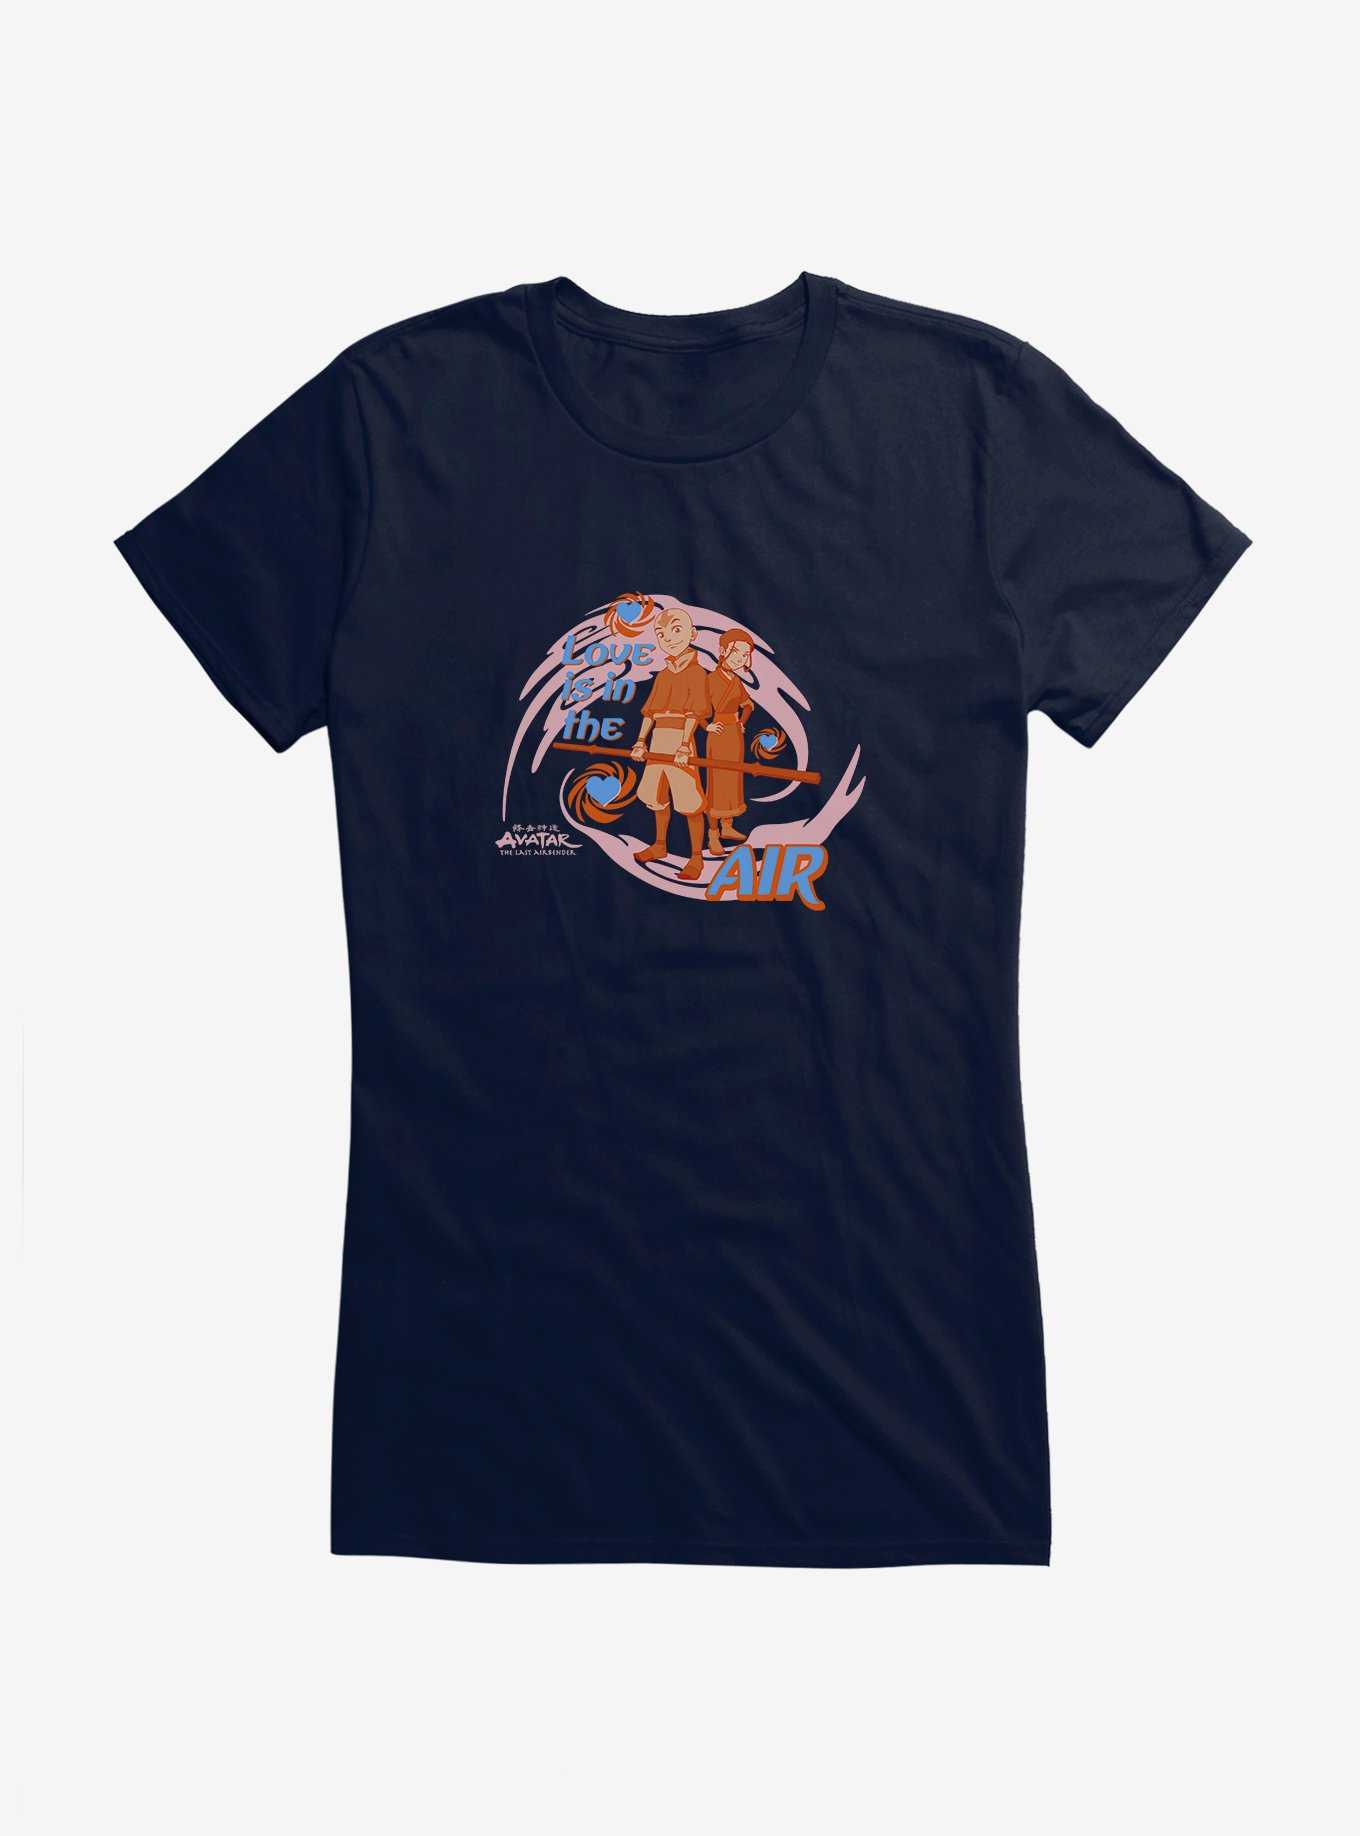 Avatar: The Last Airbender Love In The Air Girls T-Shirt, , hi-res